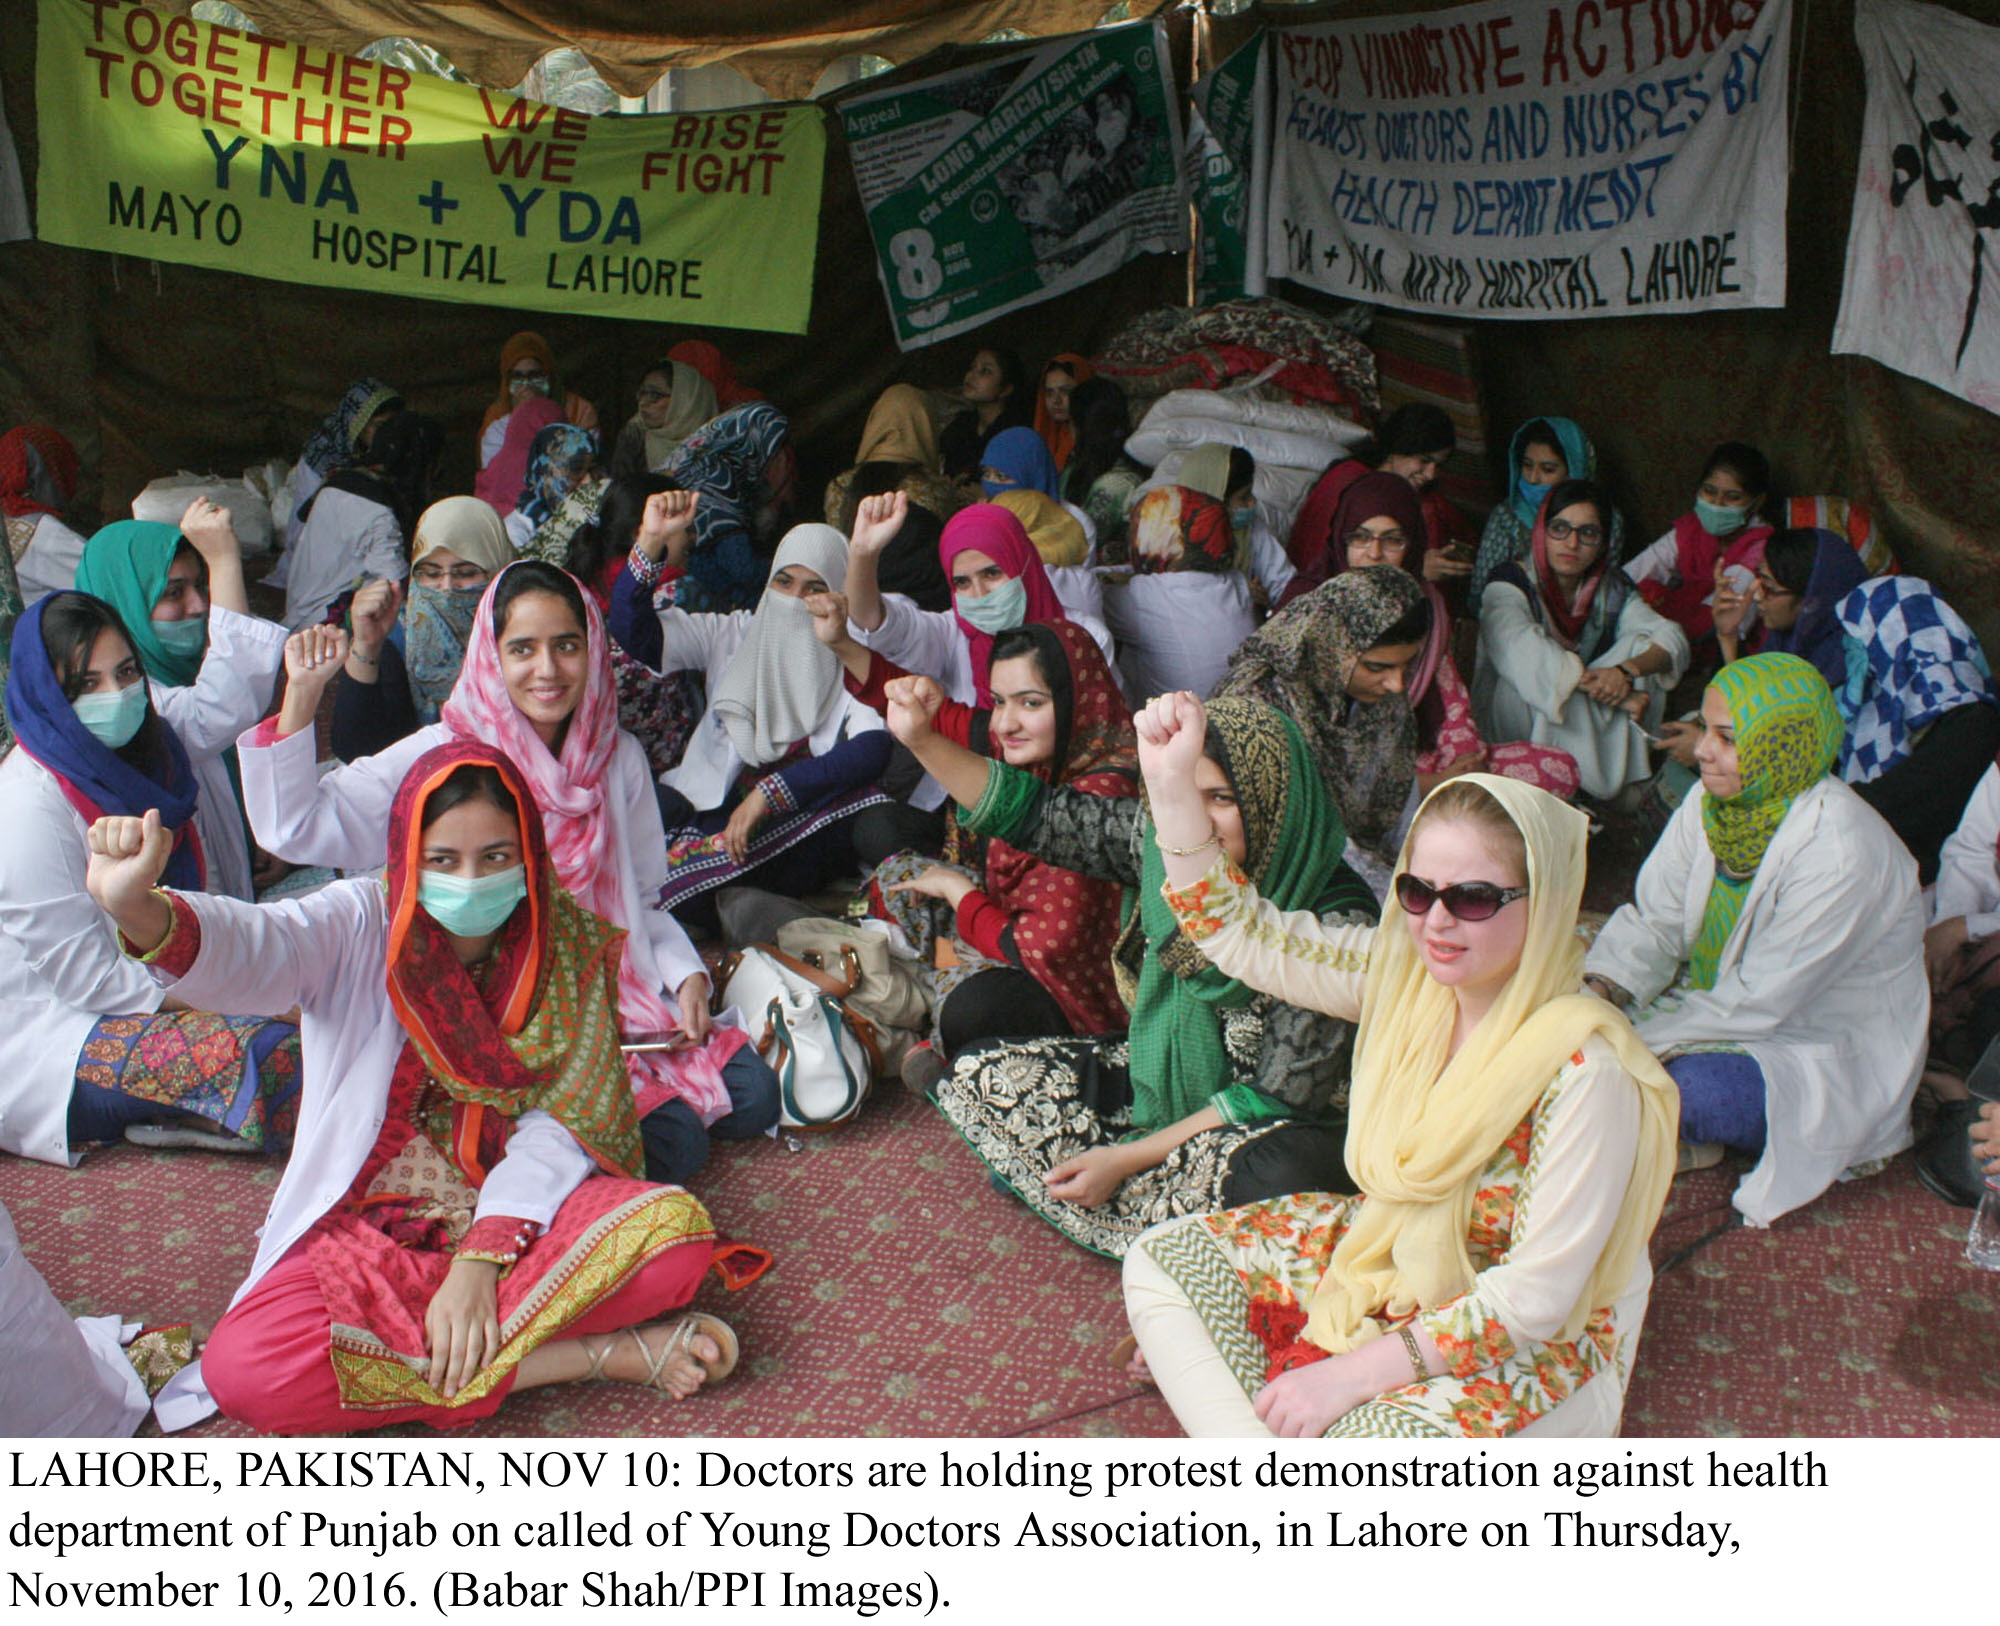 doctors are holding protest demonstration against health department on call of yda photo ppi